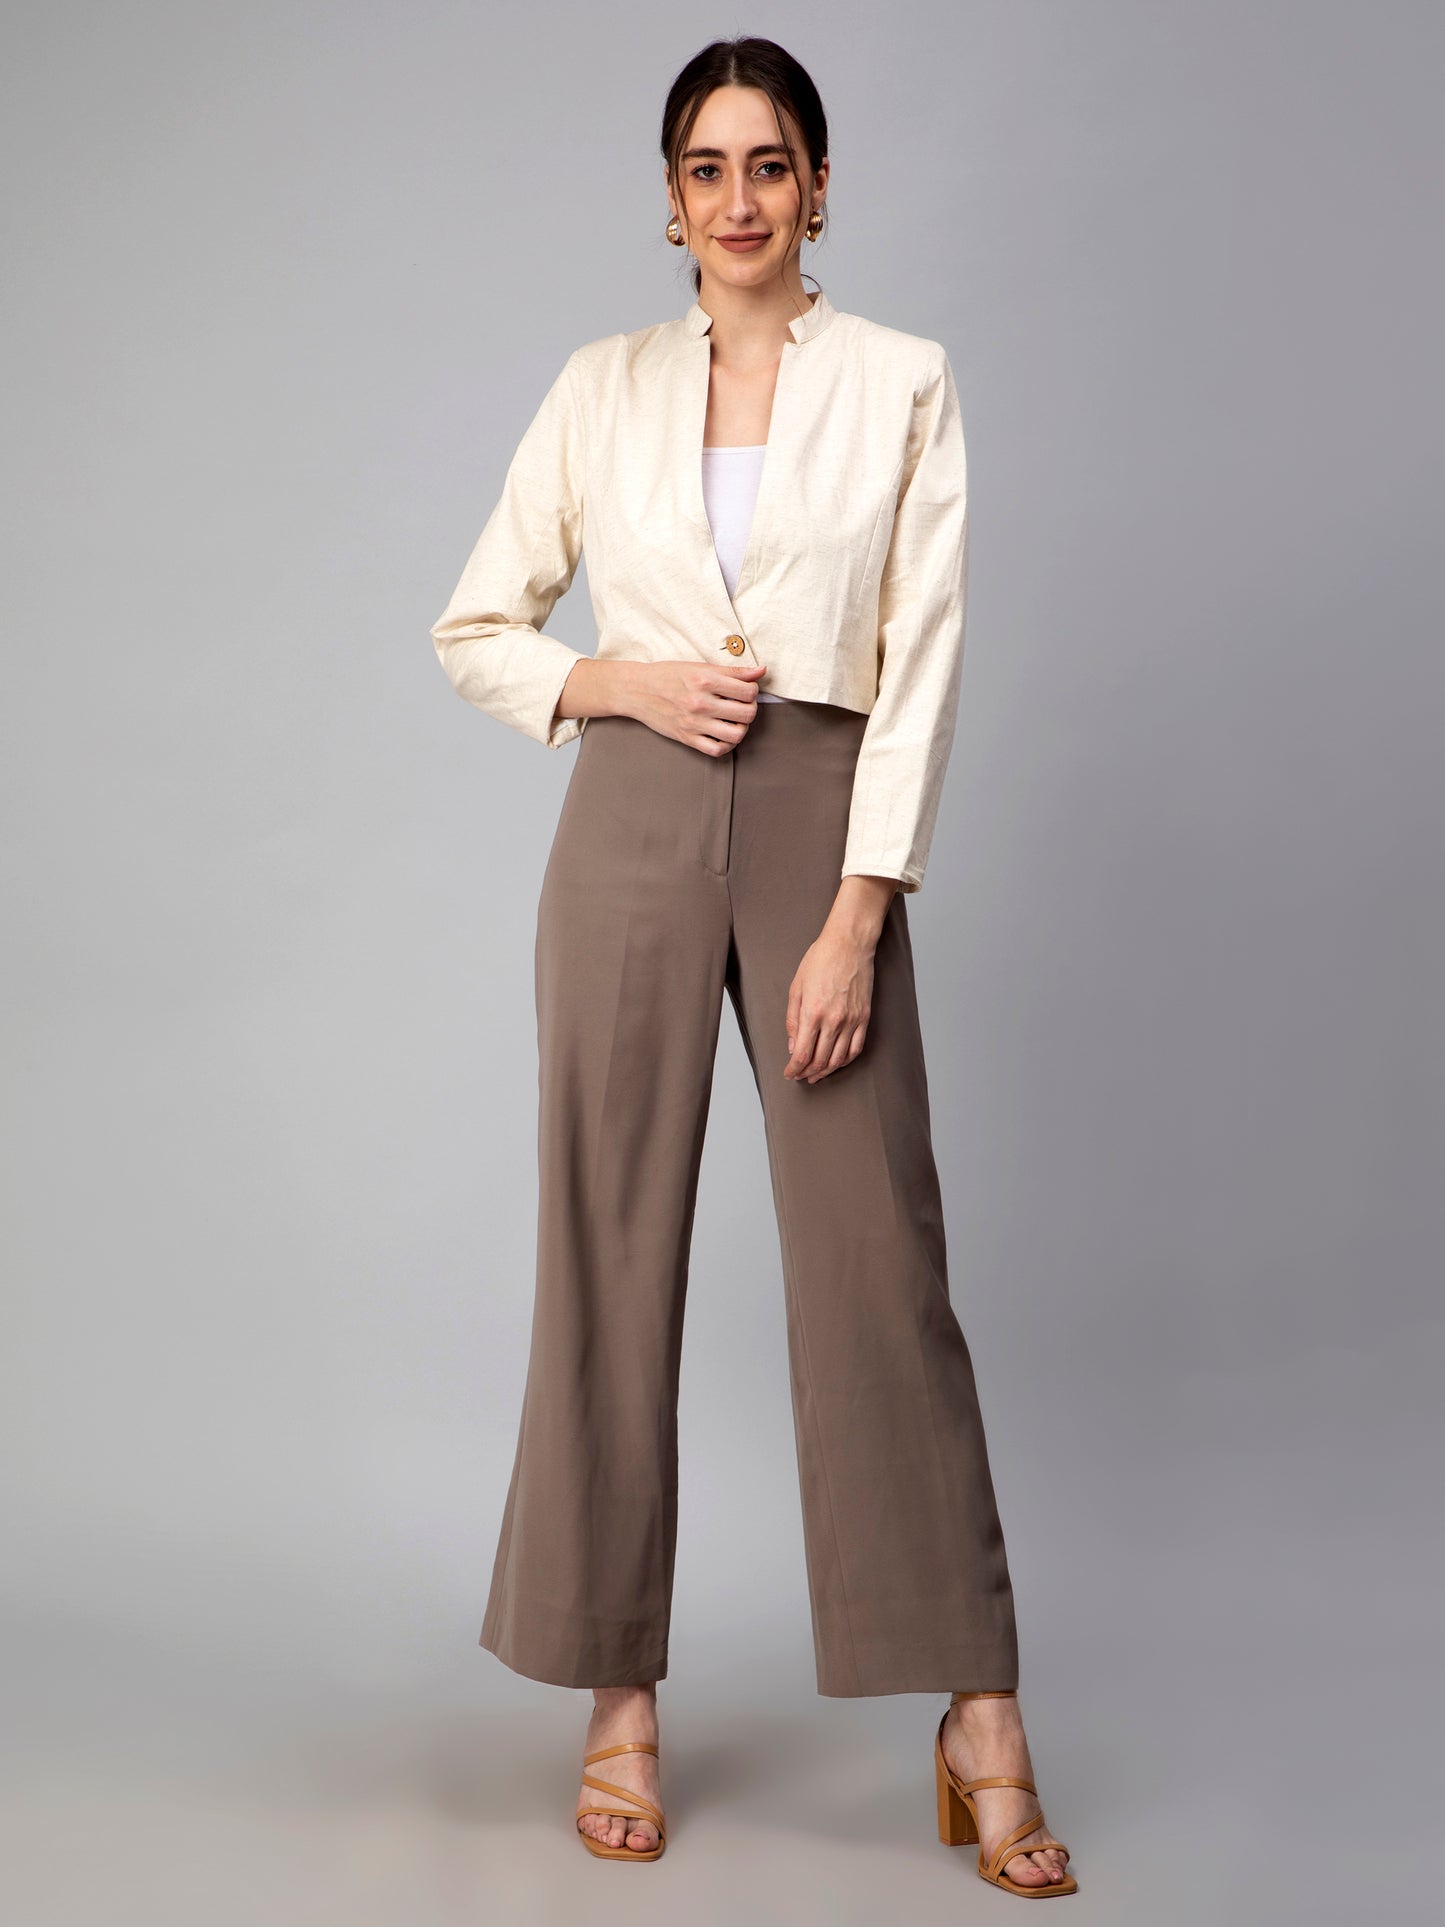 A picture of Beige Blazer In Pure Cotton, womens workwear standing against a grey background looking right into the camera